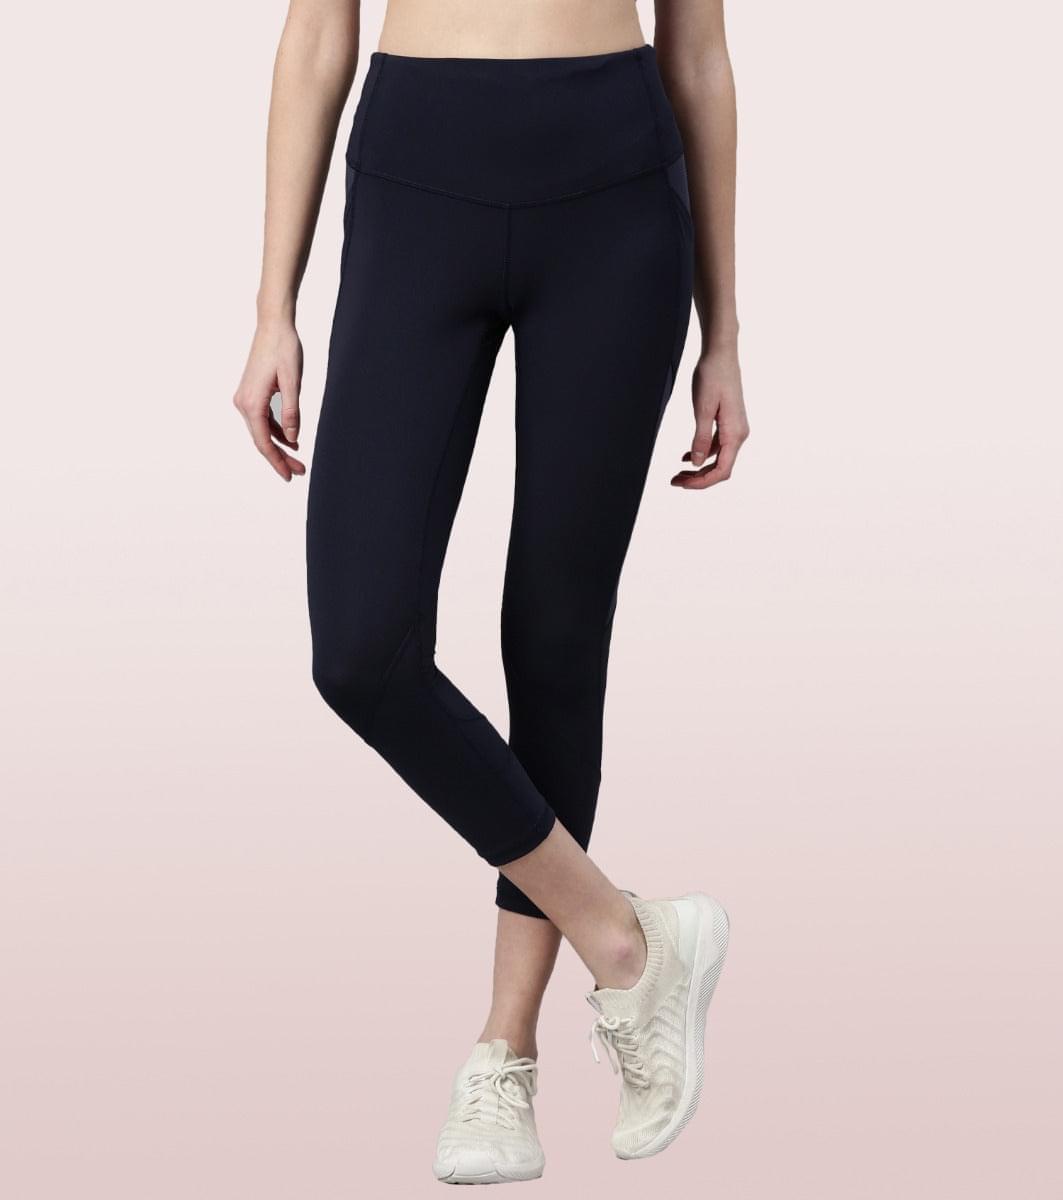 Athleisure - Buy Women's Athleisure, Activewear Collection Online at –  Enamor